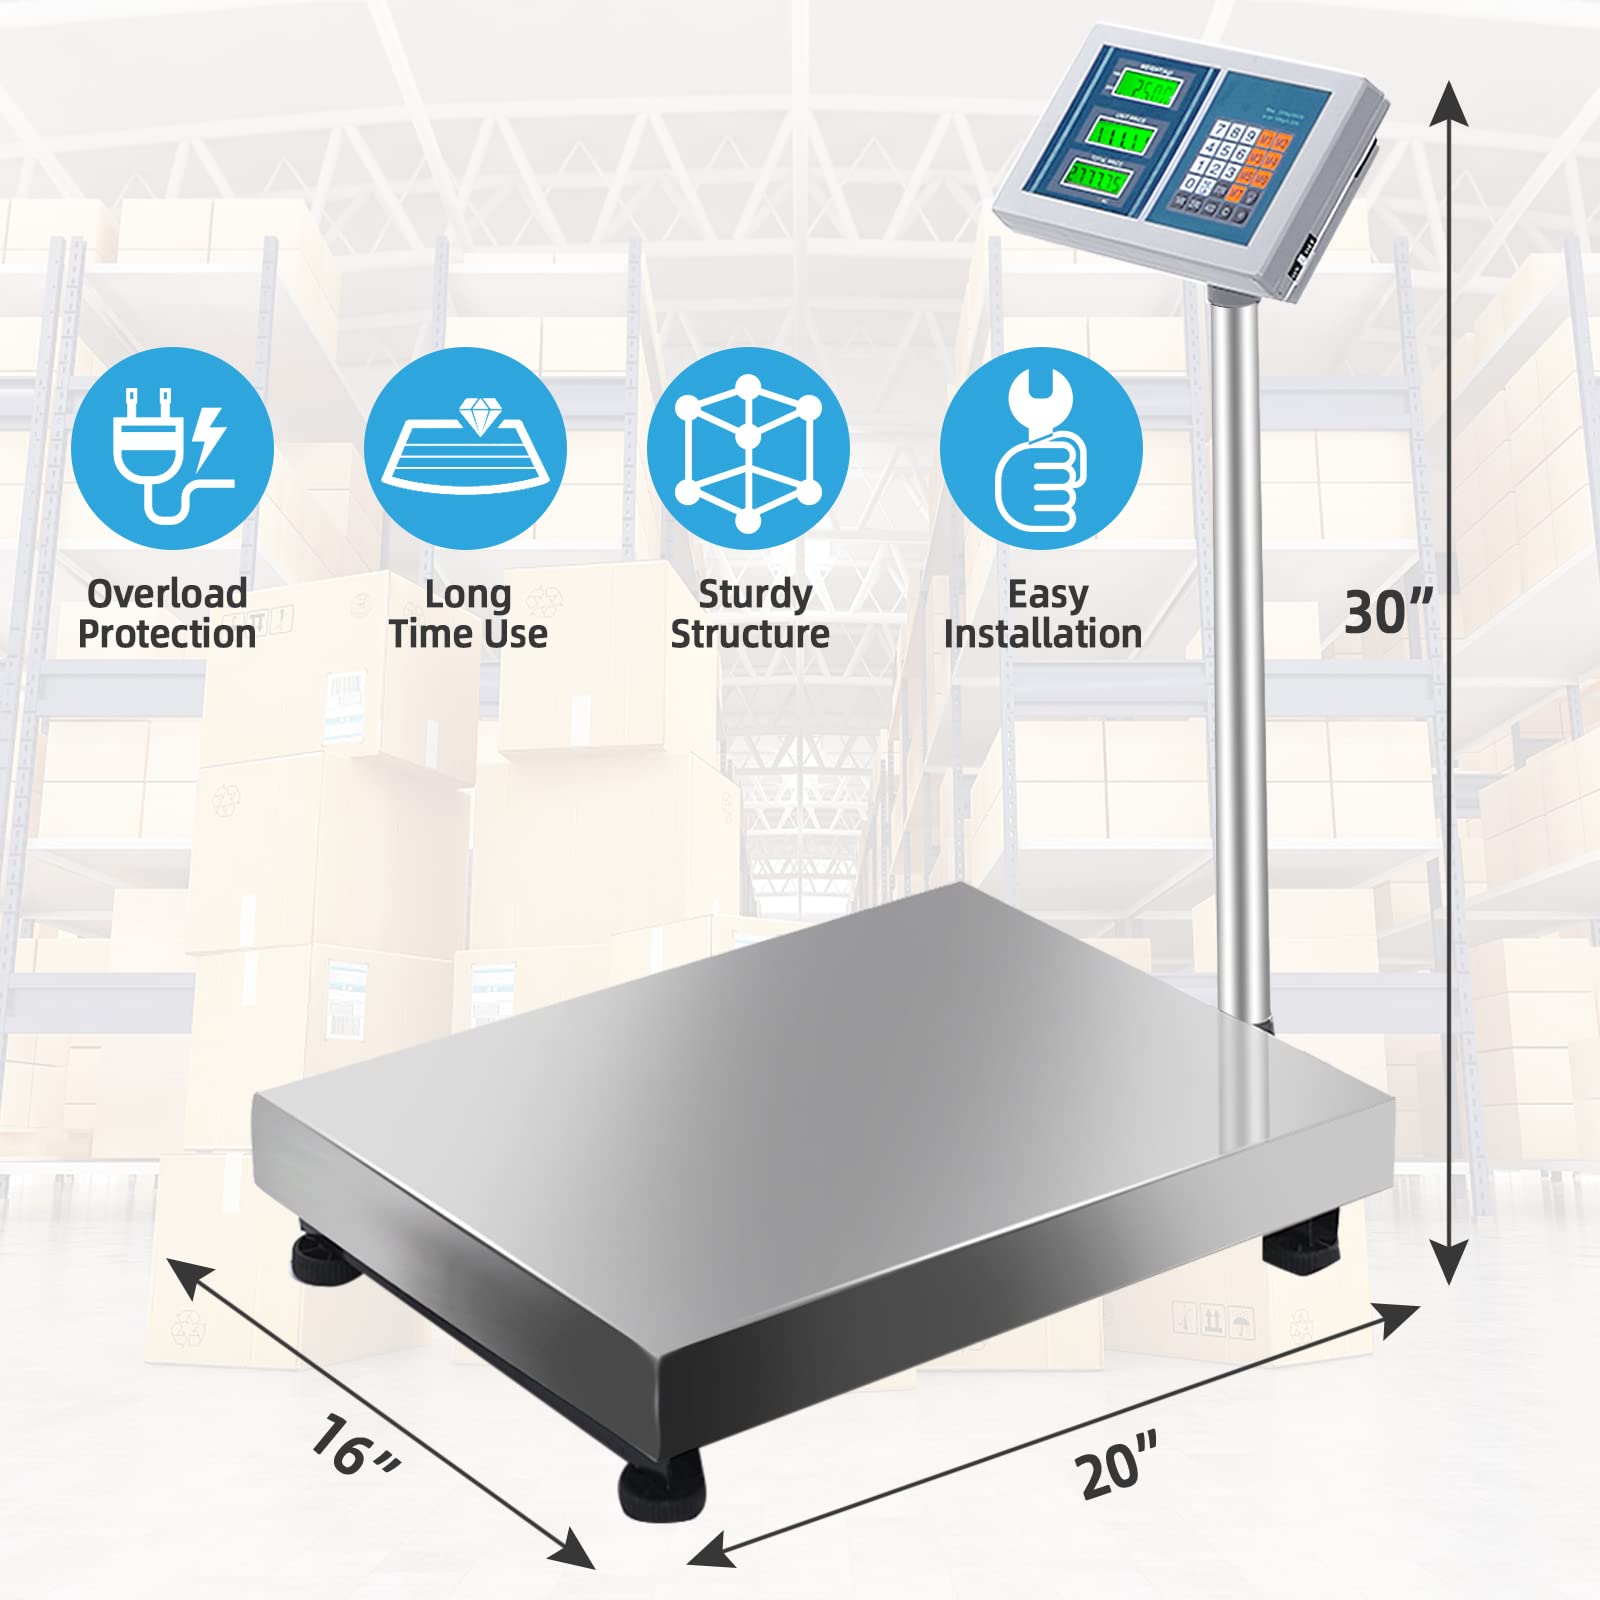 Giantex 660 LBS Weight Computing Platform Scale, with LB/KG Switchable, AC/DC Power Supply